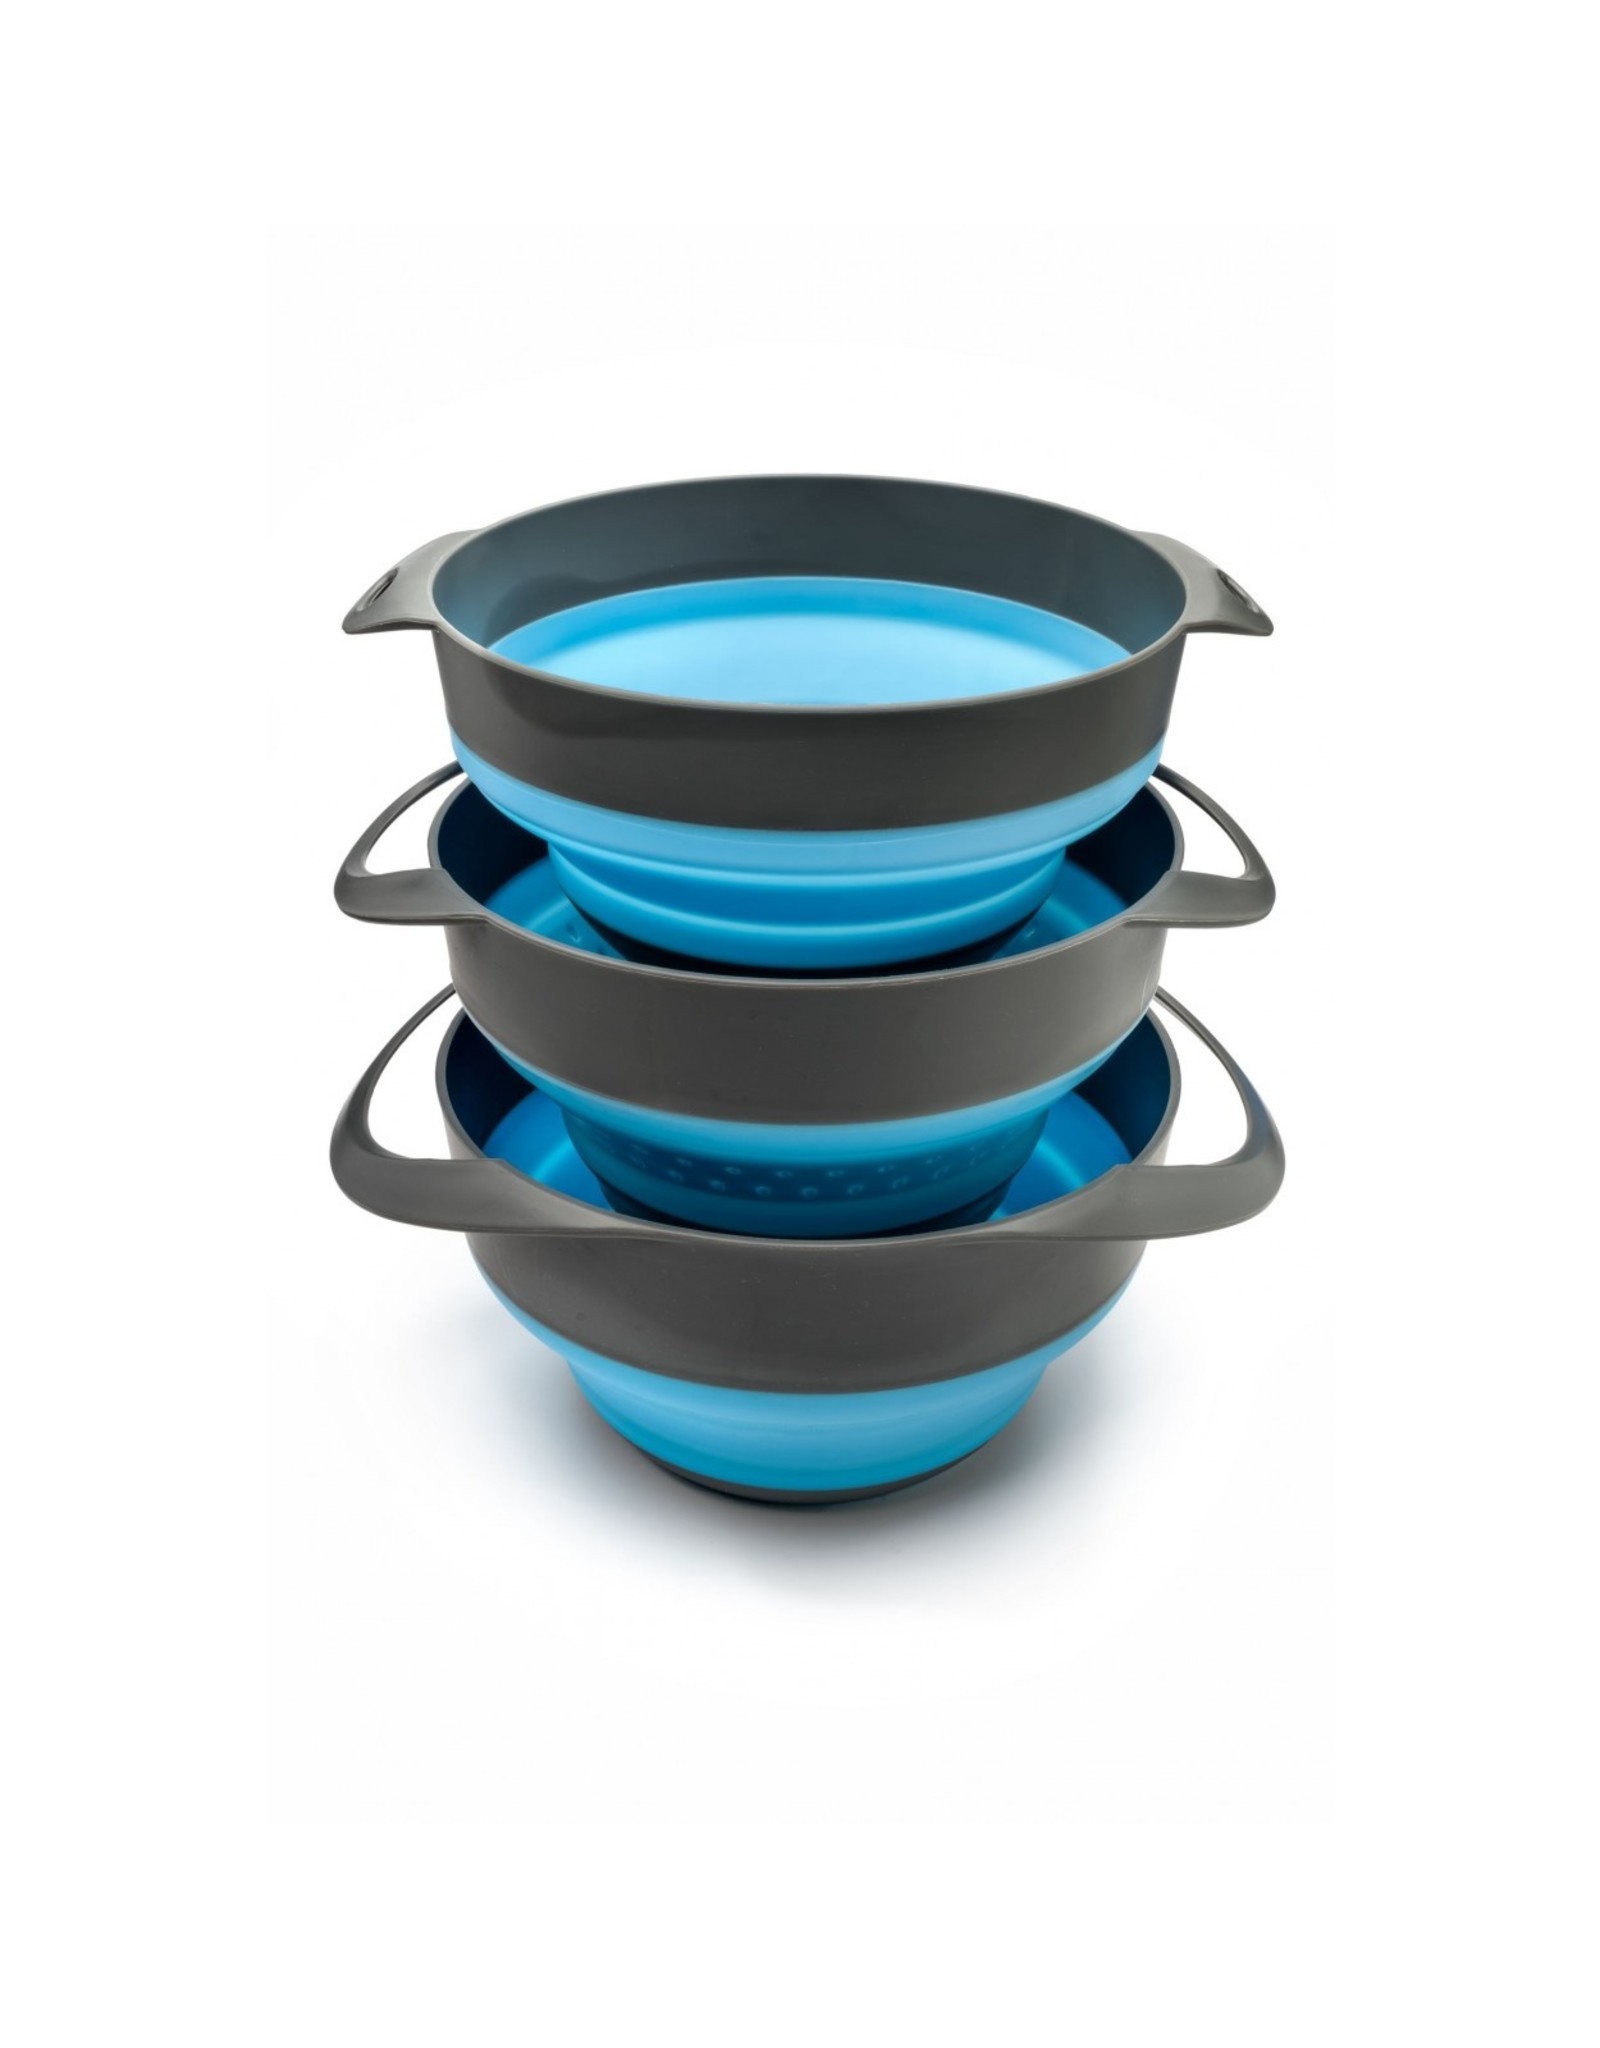 SURVIVE OUTDOORS LONGER FLAT PACK BOWL AND STRAINER SET